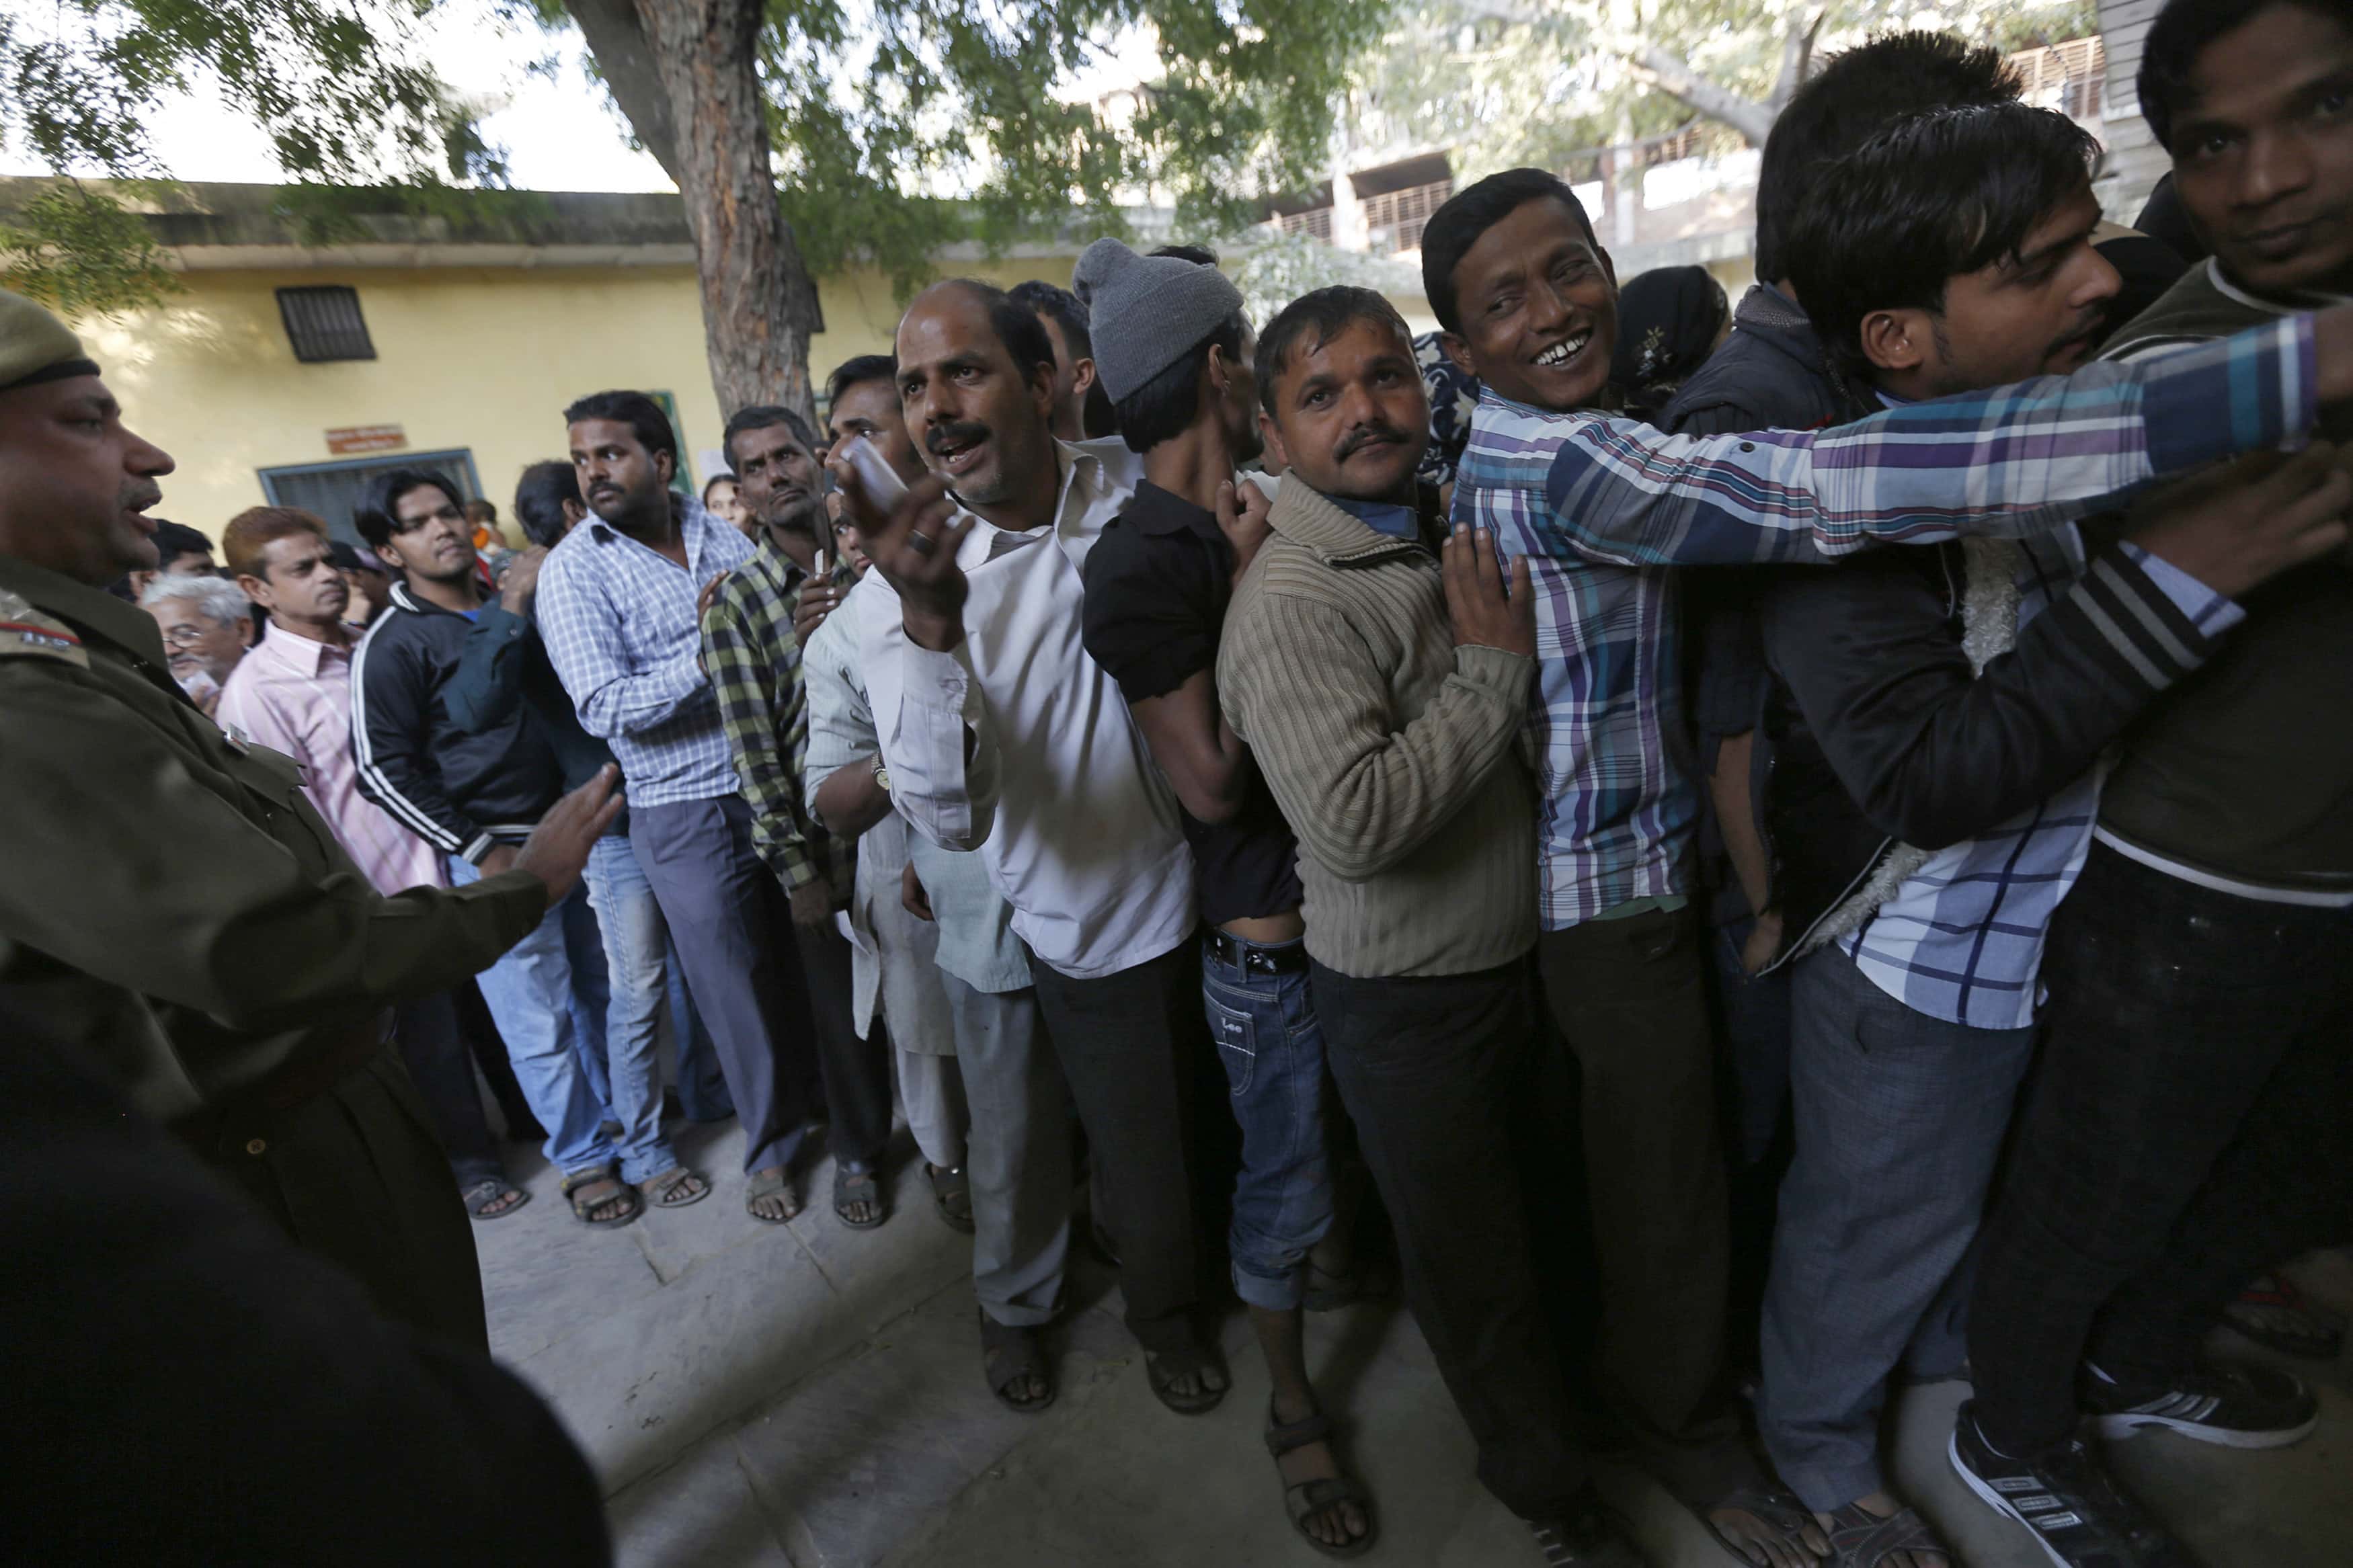 Voters line up in a queue outside a polling booth to cast their vote during the state assembly election in the old quarters of Delhi, 4 December 2013, REUTERS/Ahmad Masood